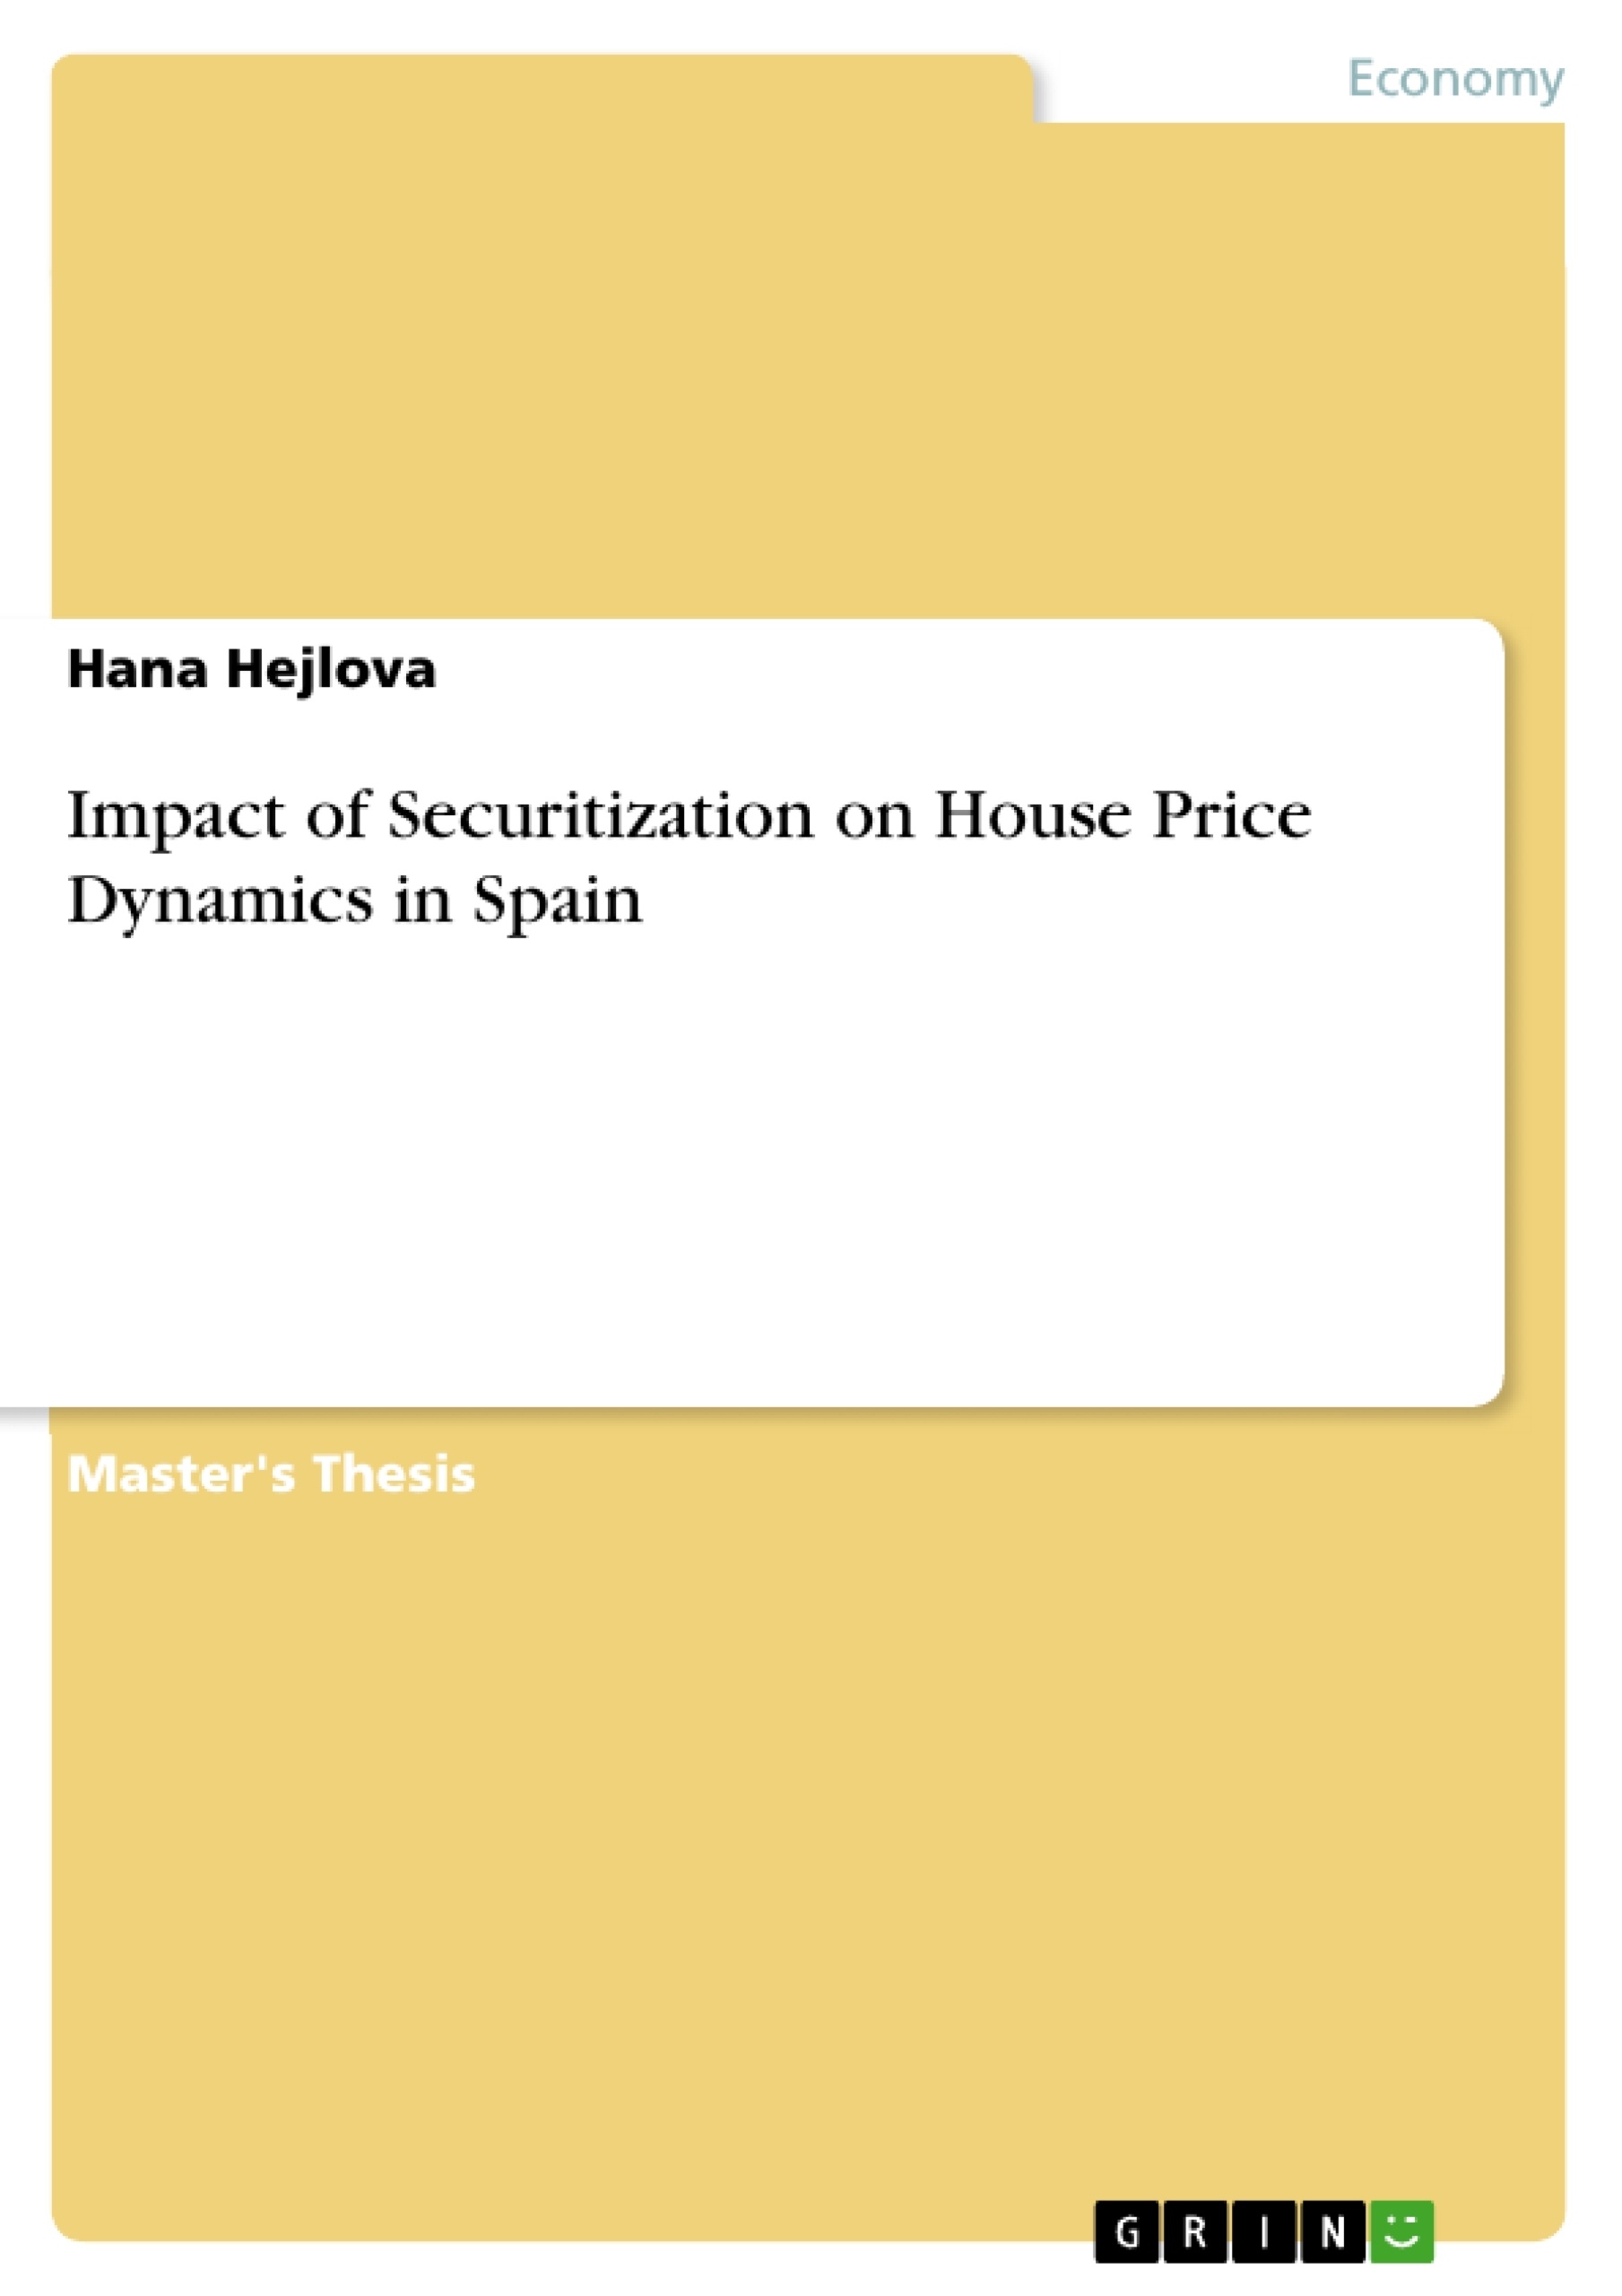 Titel: Impact of Securitization on House Price Dynamics in Spain